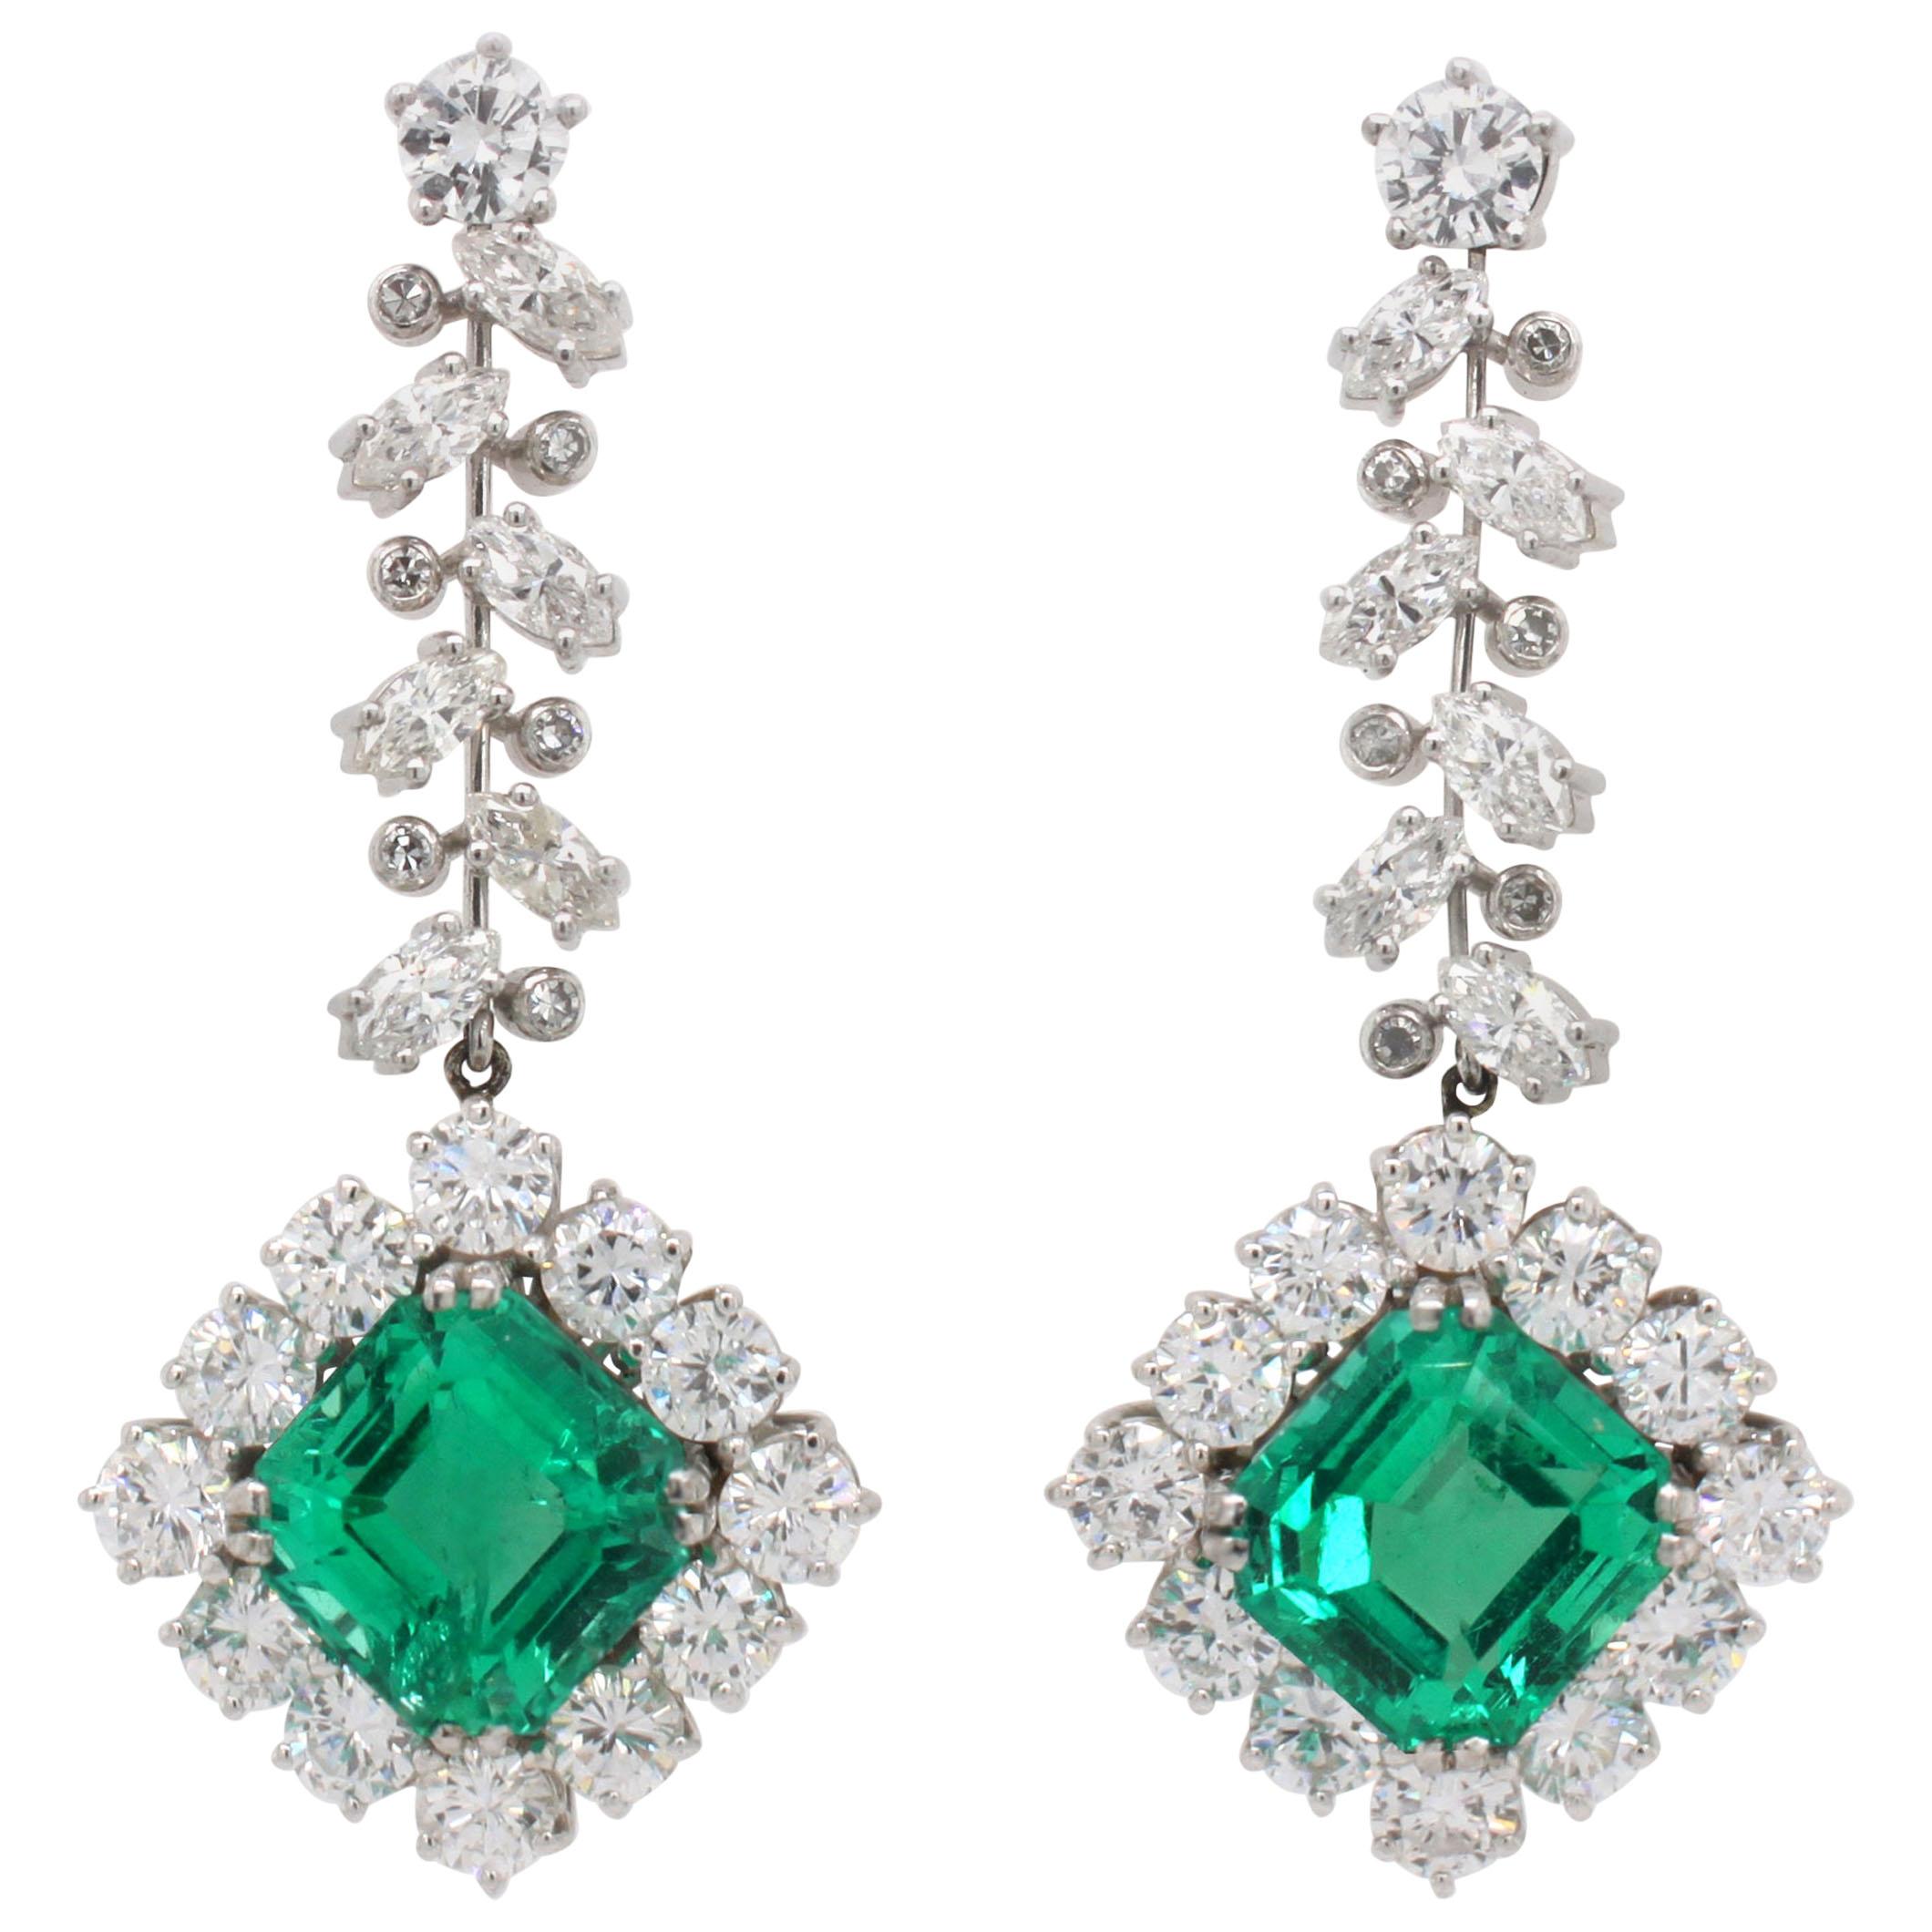 Colombian Emerald 'No/Minor Oil' and Diamond Earring